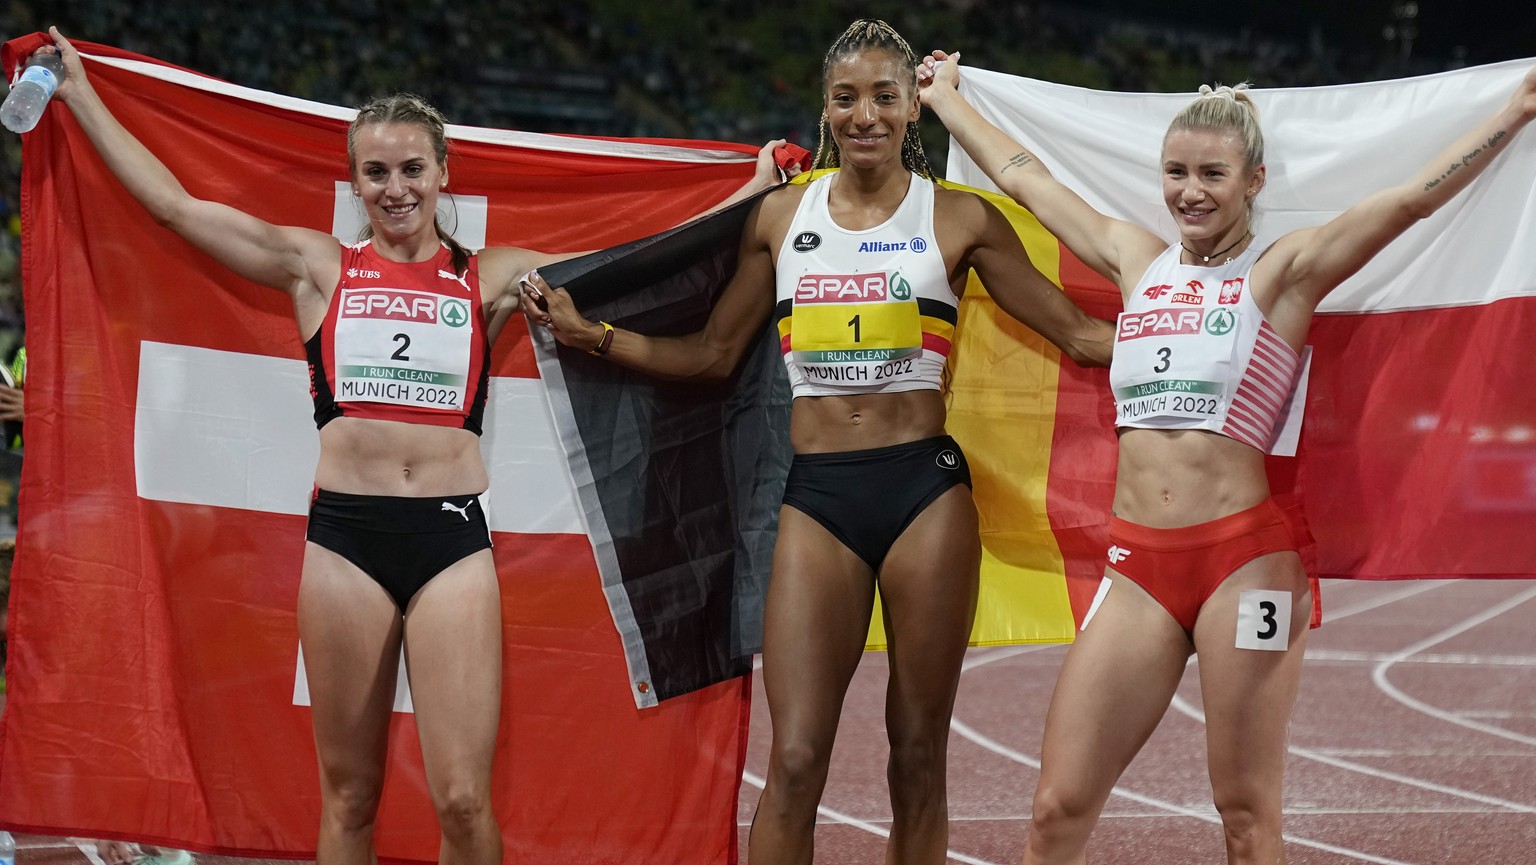 Bronze medalist Annik Kalin, of Switzerland, gold medalist Nafissatou Thiam, of Belgium, and silver medalist Adrianna Sulek, of Poland, from left to right, pose after finishing the Women's heptathlon  ...